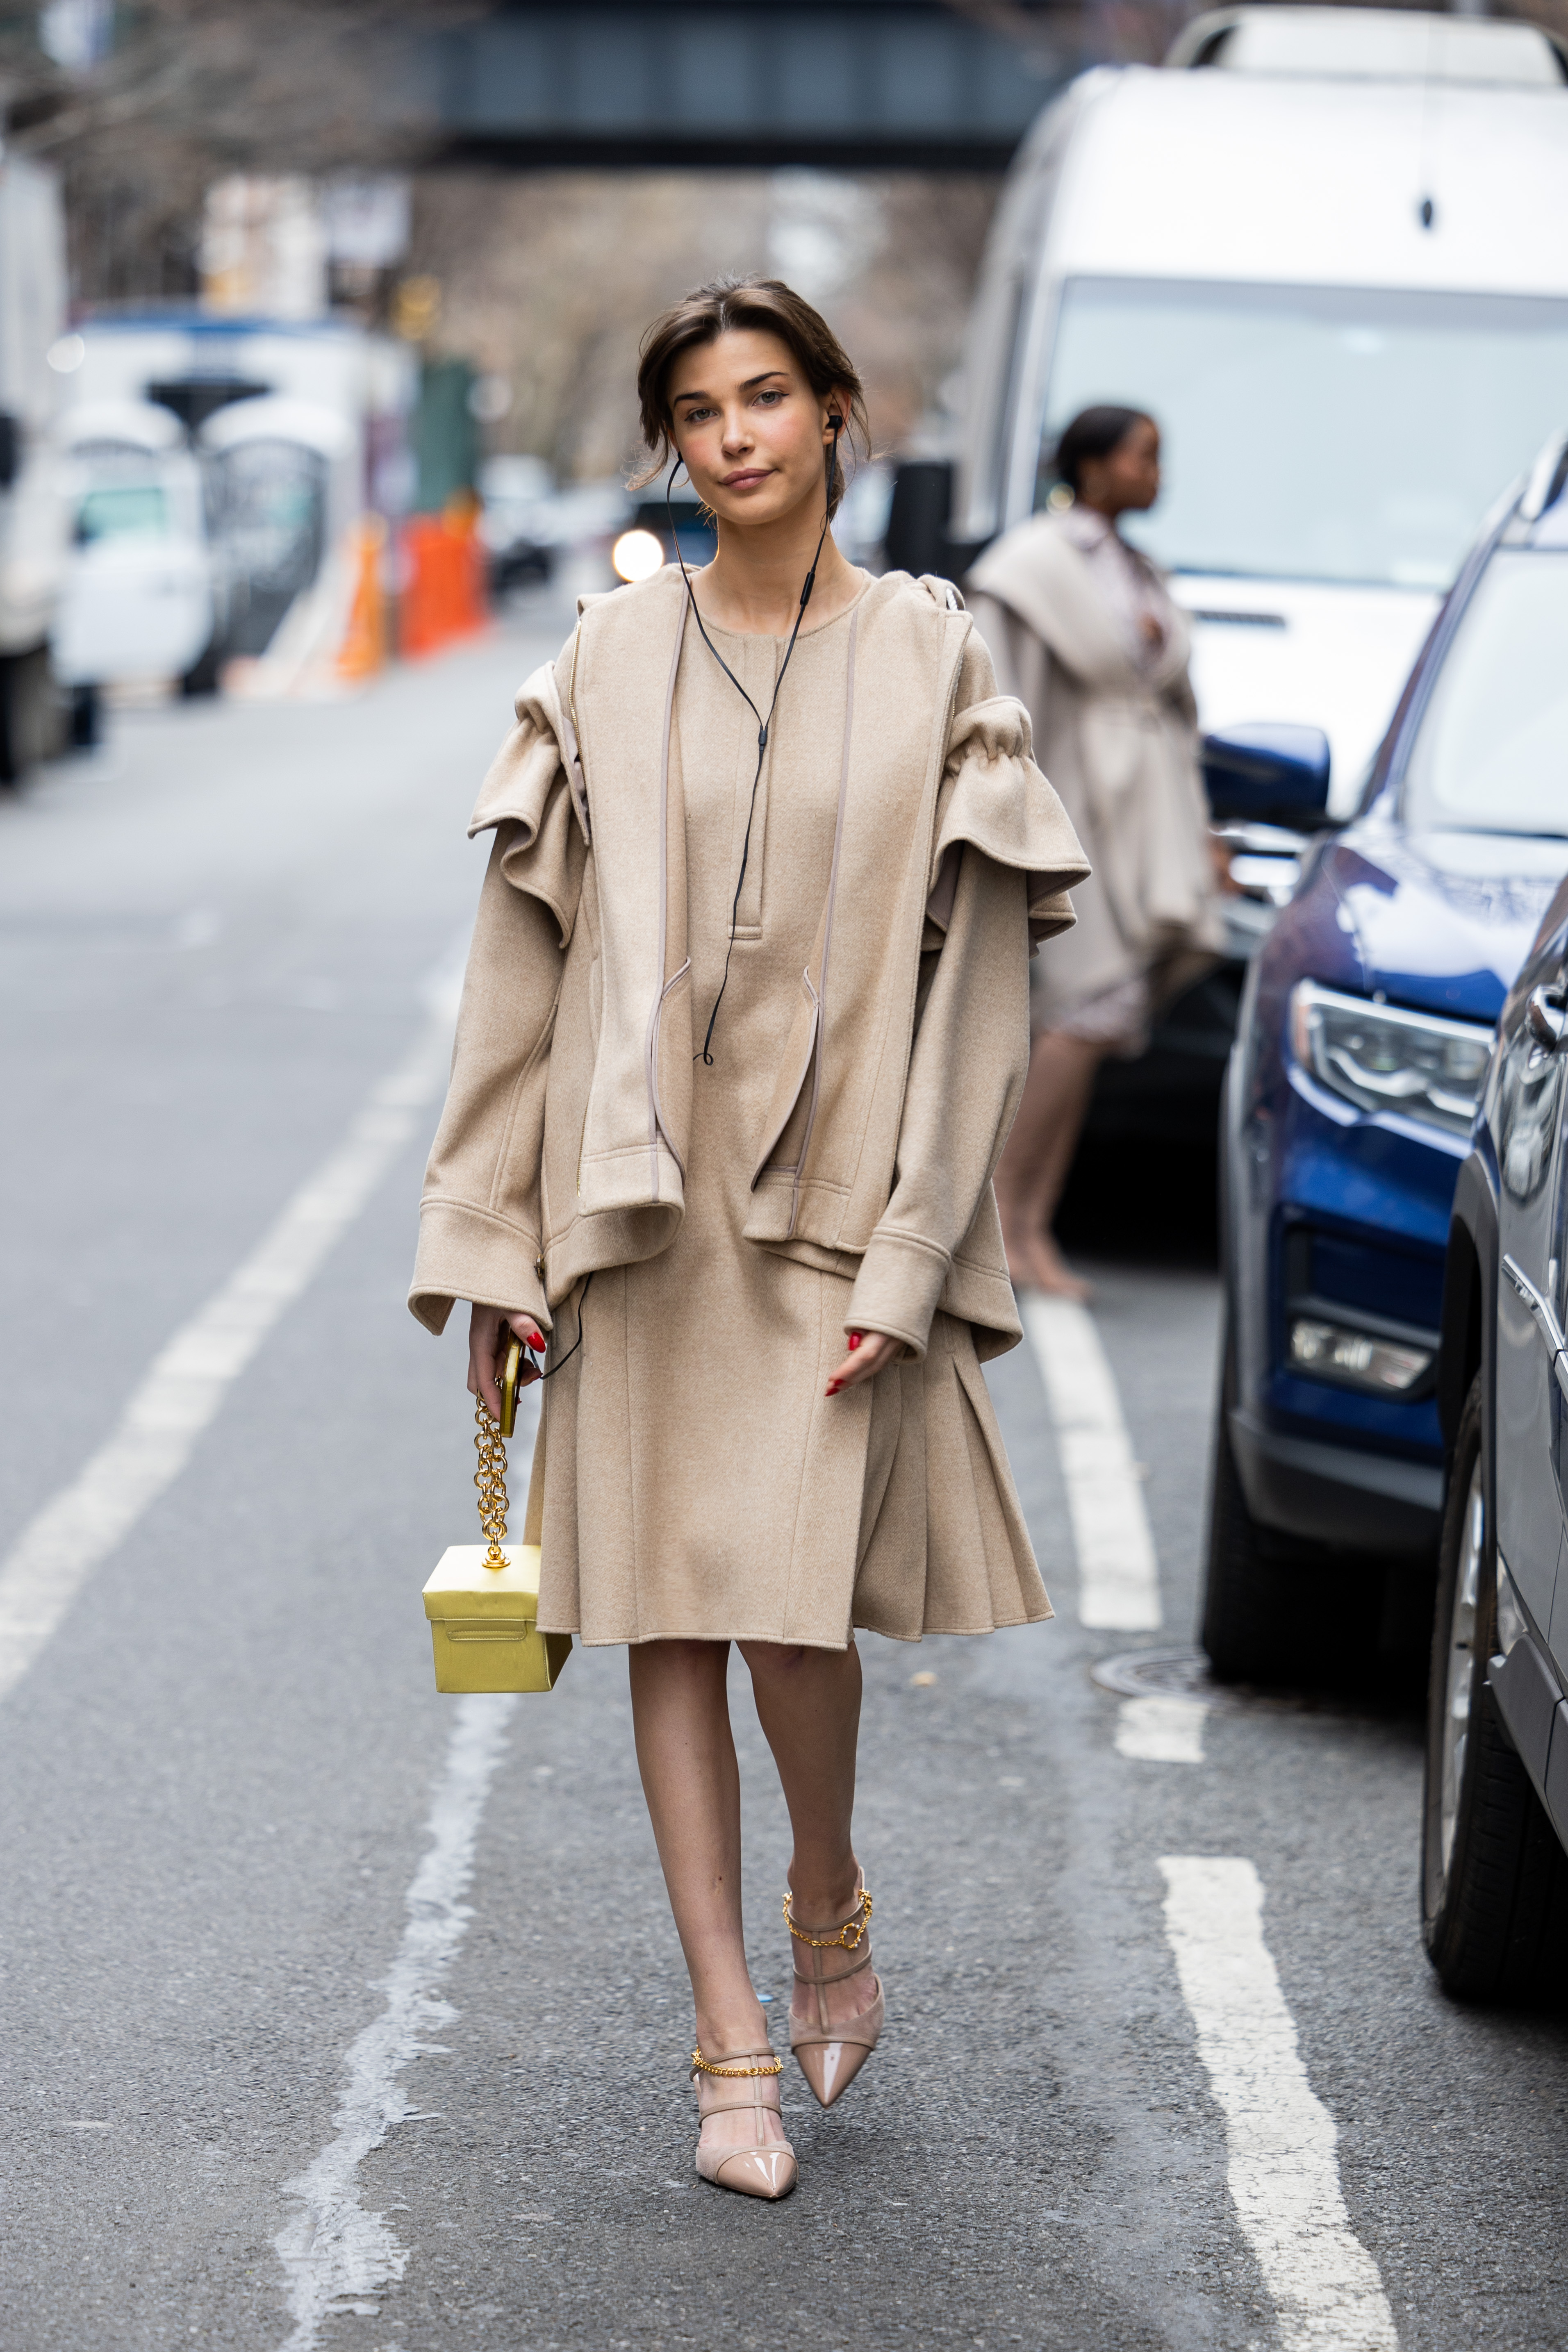 Charlotte Briar D'Alessio wears a beige dress, jacket, yellow bag, and pointed heels outside Adeam during New York Fashion Week on February 12, 2023, in New York City